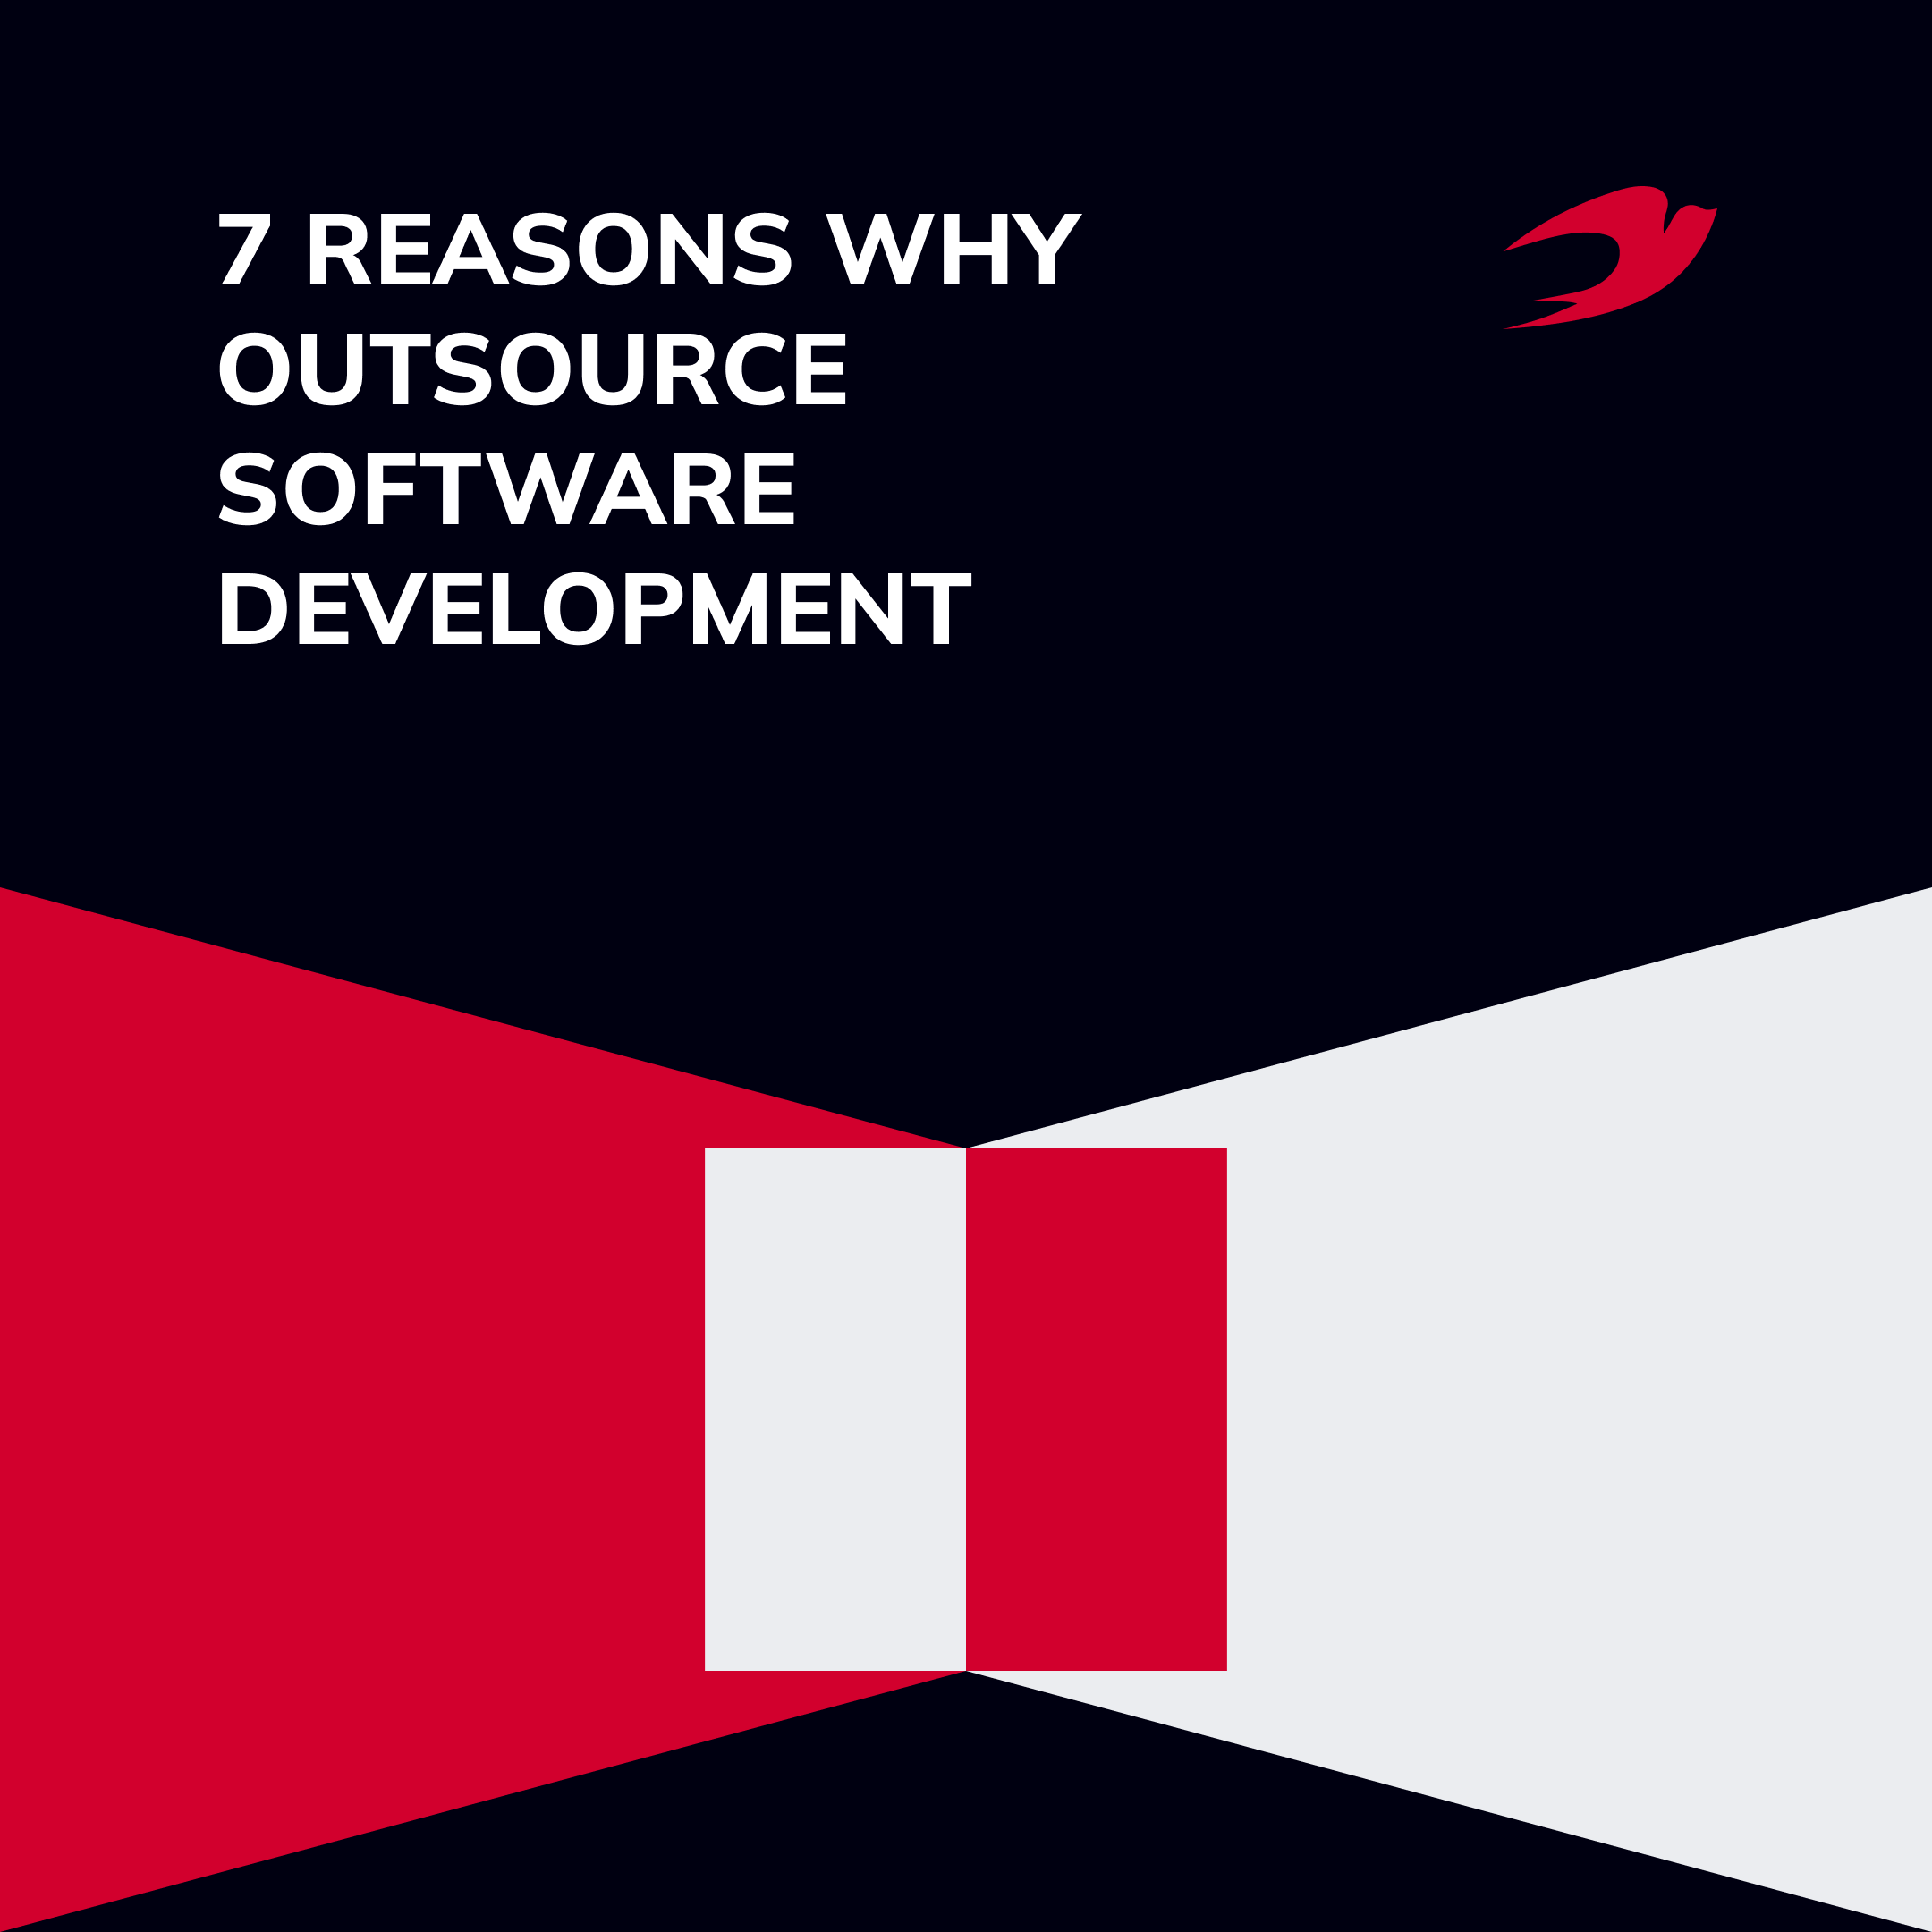 7 Reasons Why Outsourcing Software Development